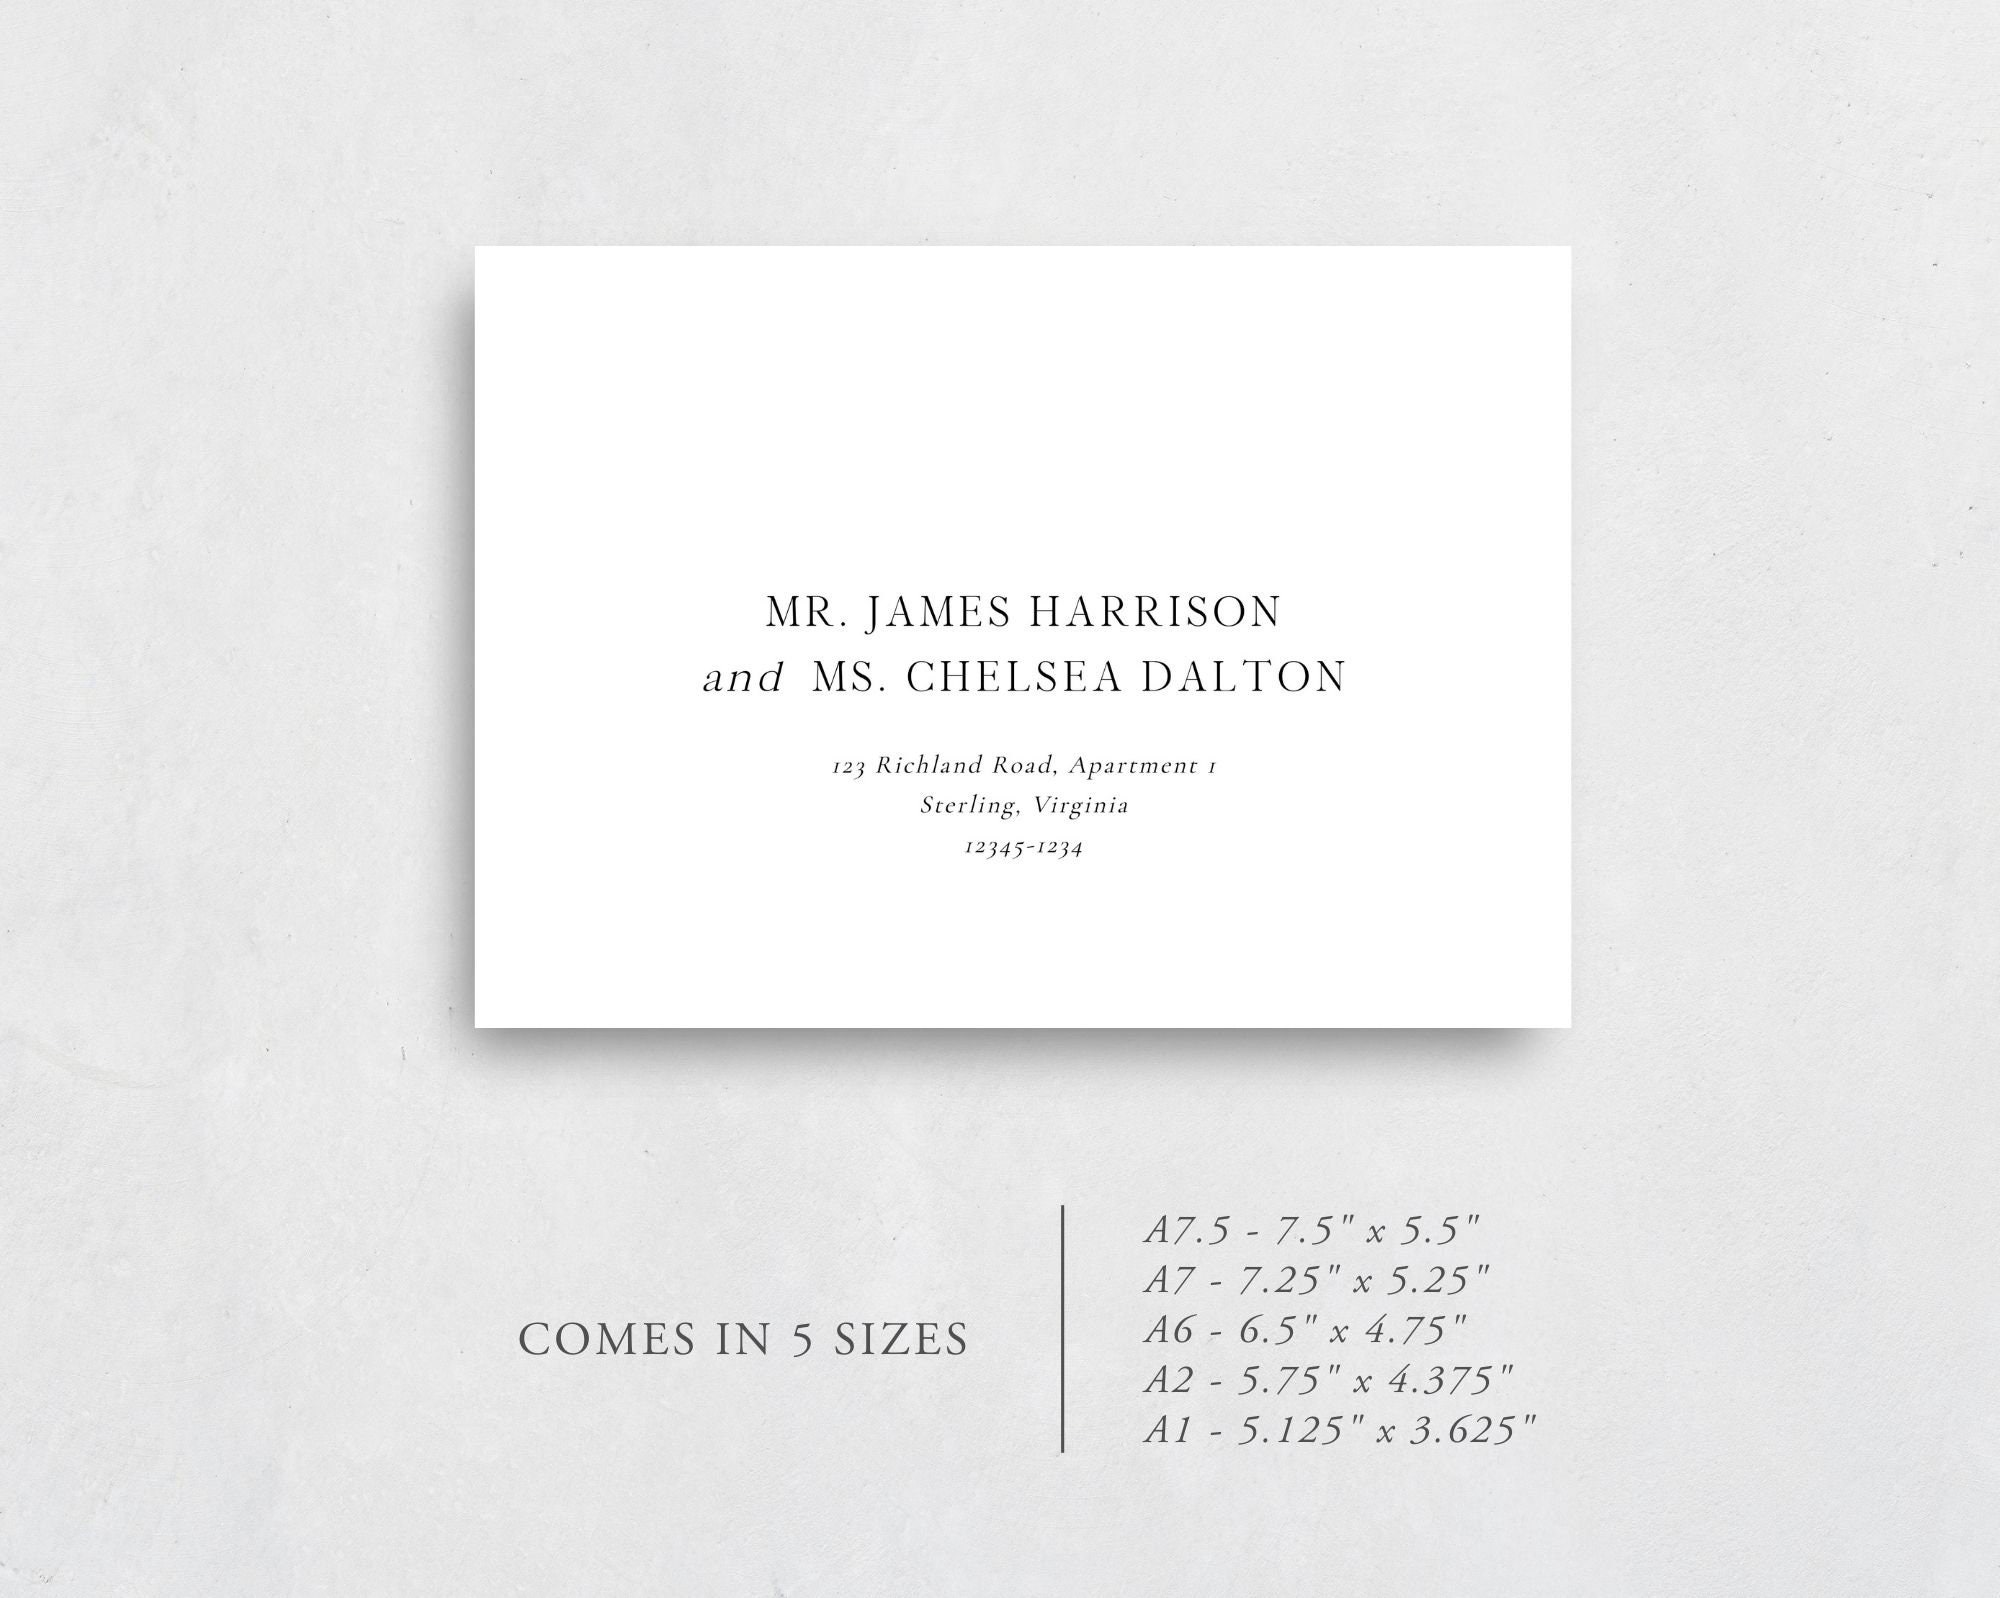 Wedding Envelope Template Give Your Invitation Envelopes the Professional  Treatment With This 100% Editable Address Template Harrison 